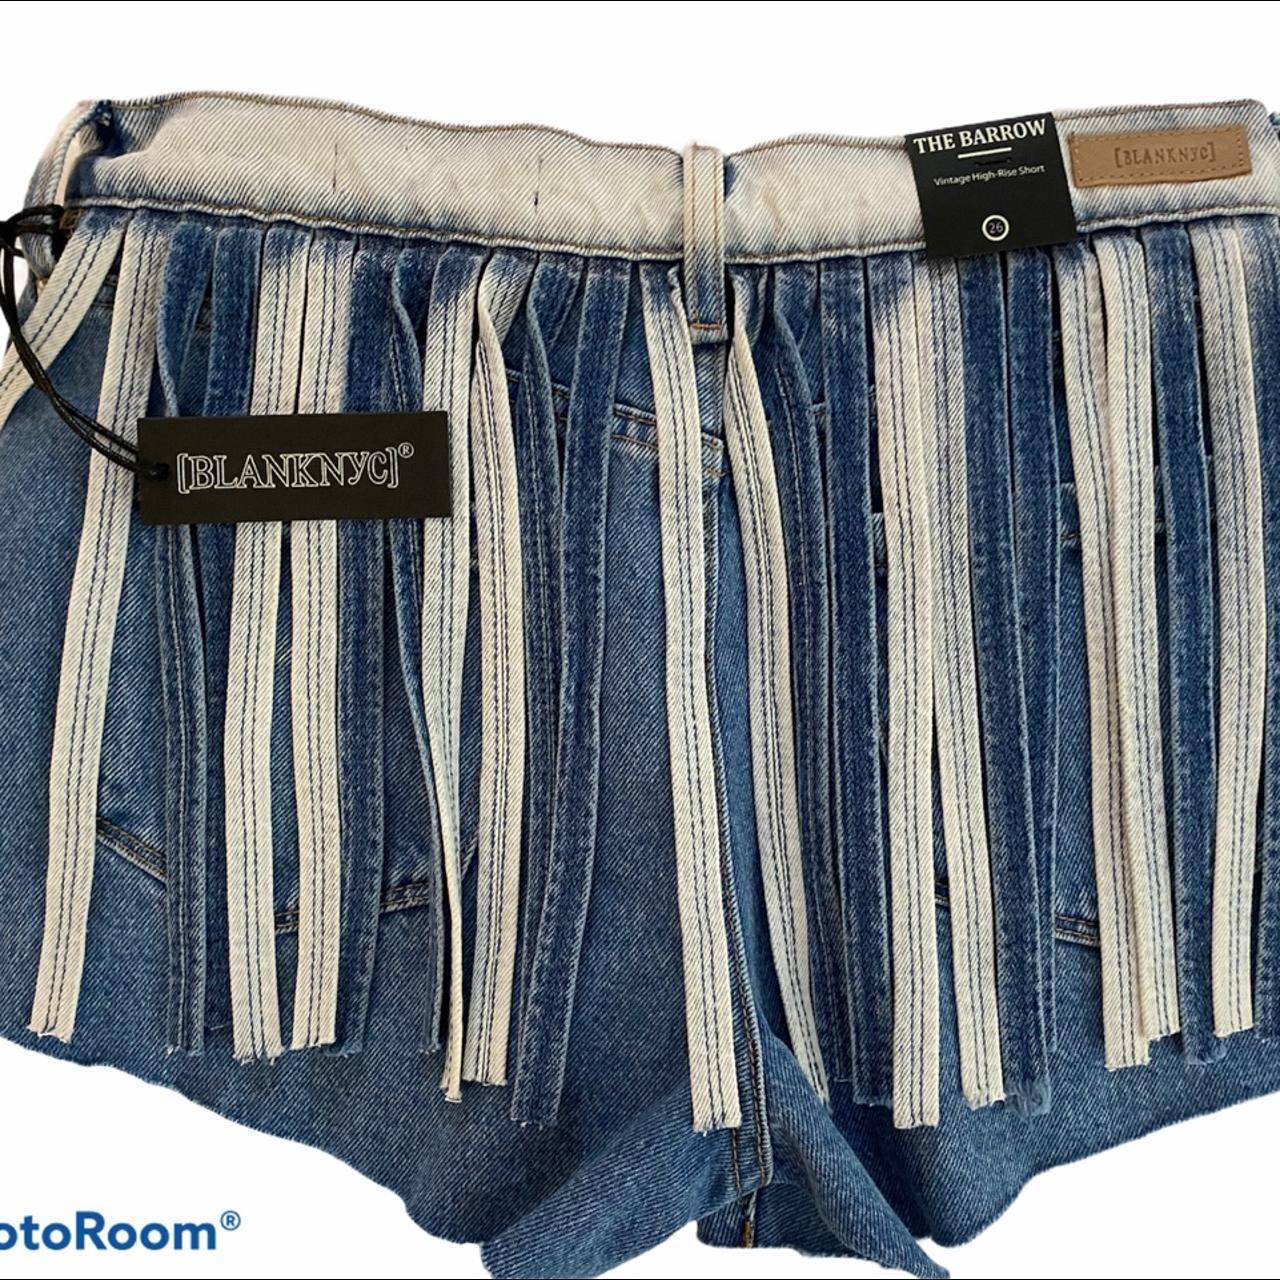 BLANK NYC Fringe Denim Shorts. Called the barrow and... - Depop